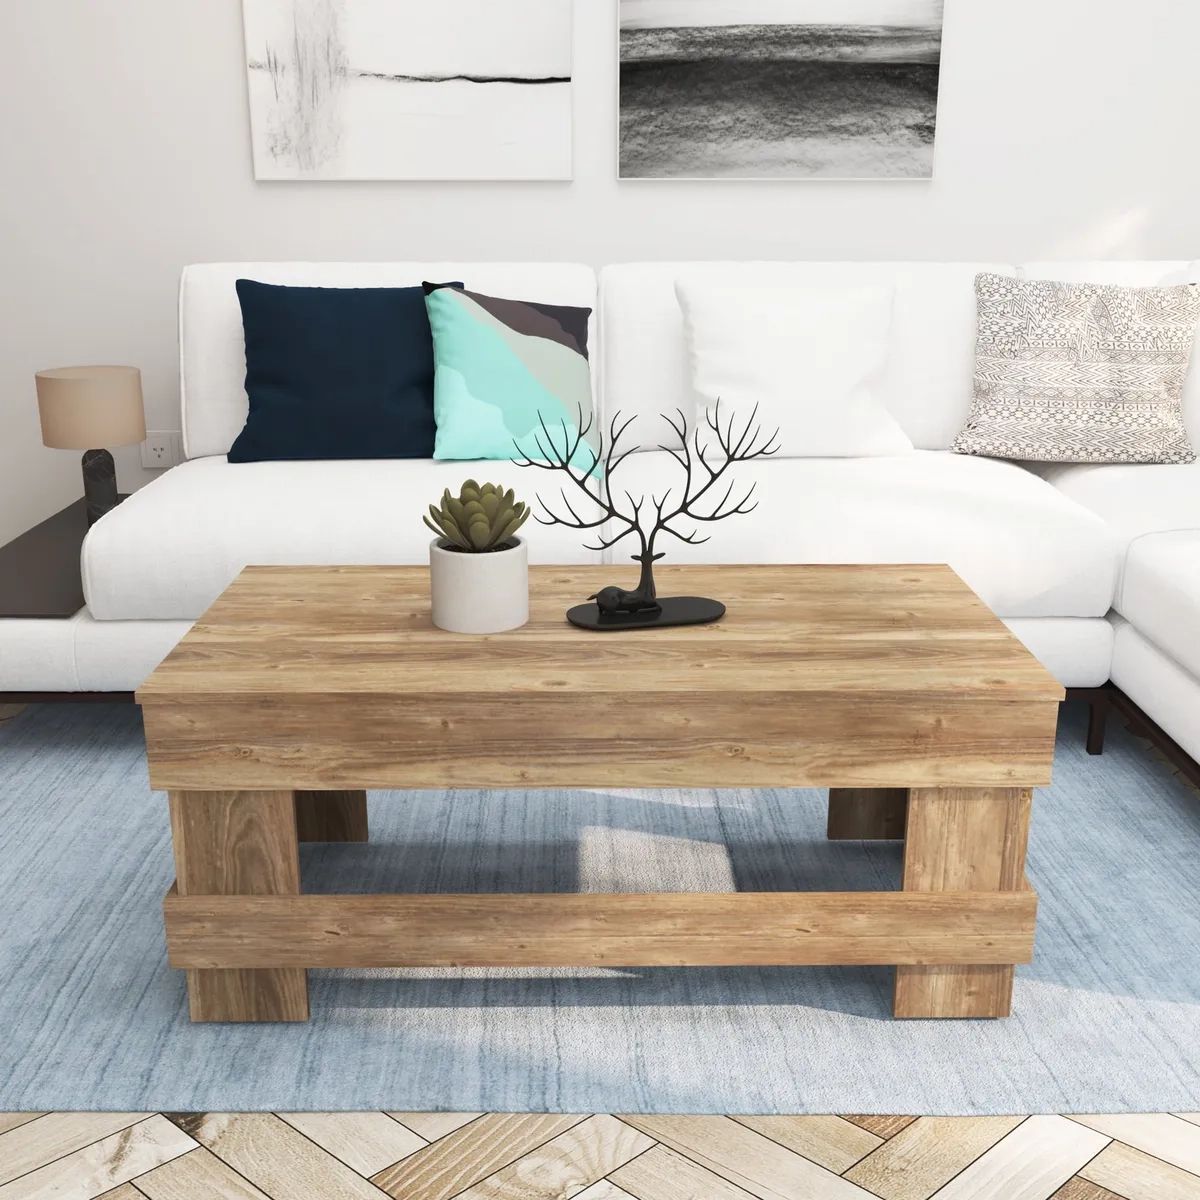 Woven Paths Reclaimed Wood Coffee Table, Natural | Ebay In Woven Paths Coffee Tables (View 10 of 15)